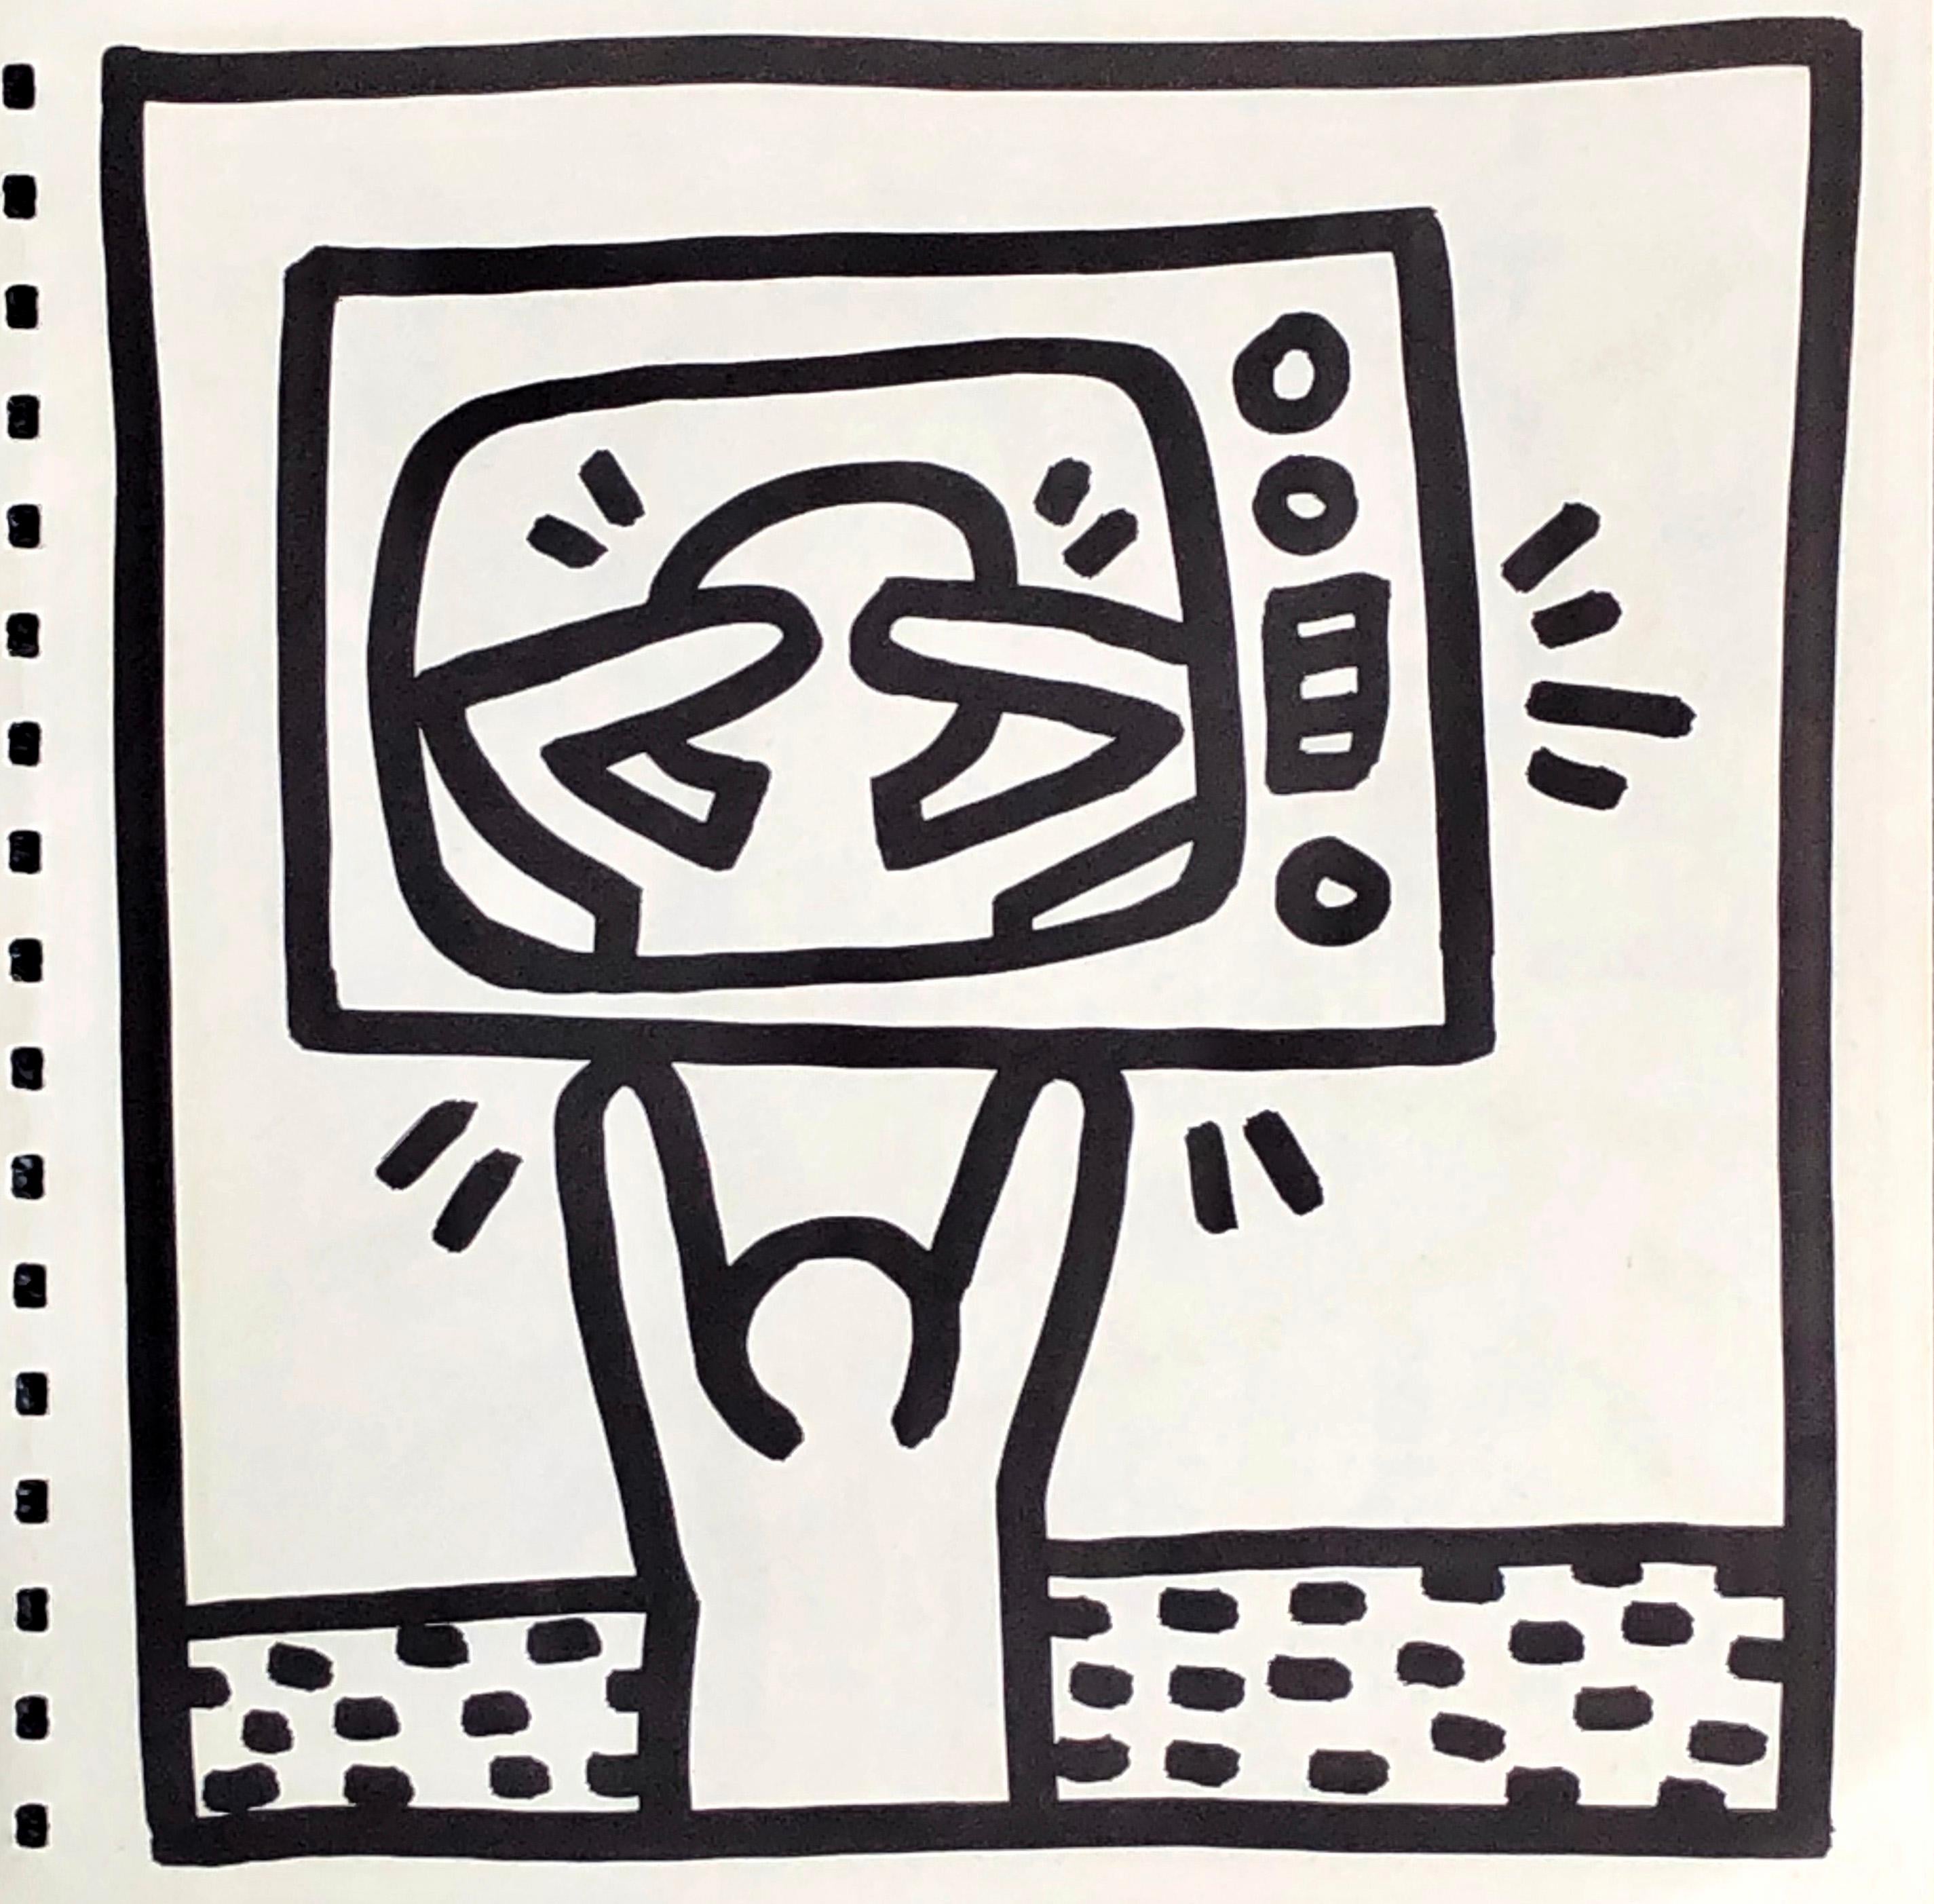 Keith Haring (untitled) TV Lithograph 1982
Double-sided offset lithograph published by Tony Shafrazi Gallery, New York, 1982 from an edition of 2000. 

Single sheet lithograph from the seminal spiral bound, early monograph showcasing Haring's work.